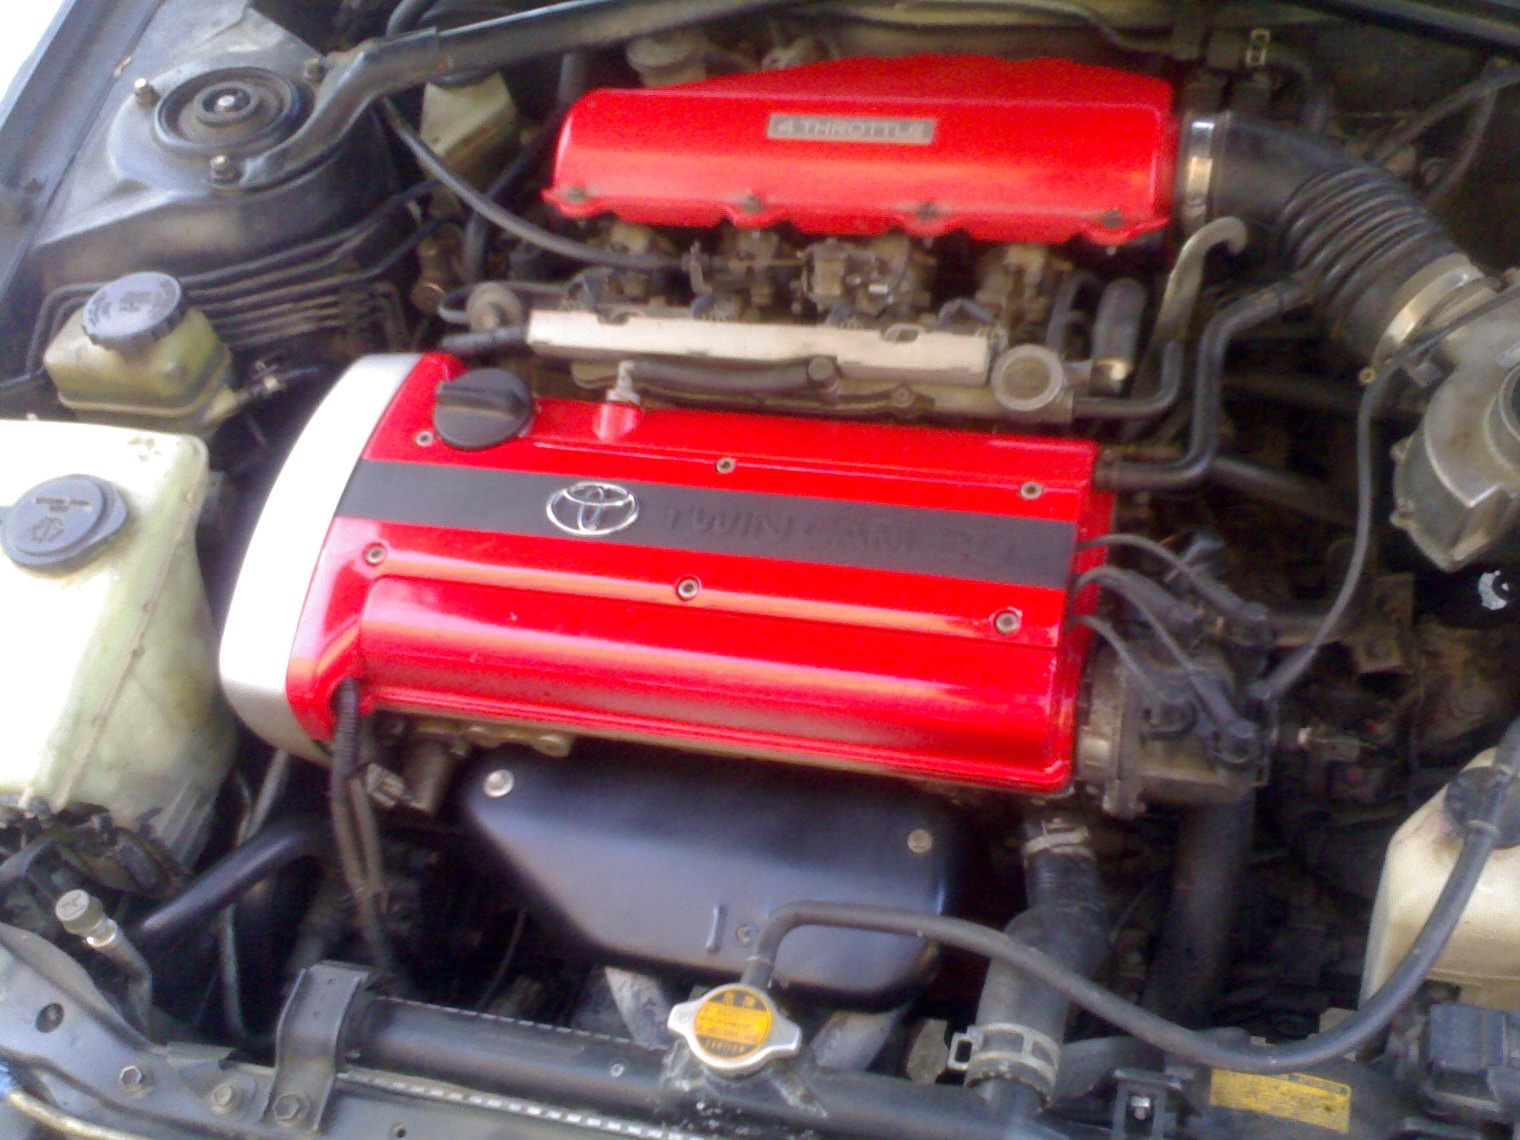 Finally got around to the engine cover - Toyota Corolla Levin 16 L 1994